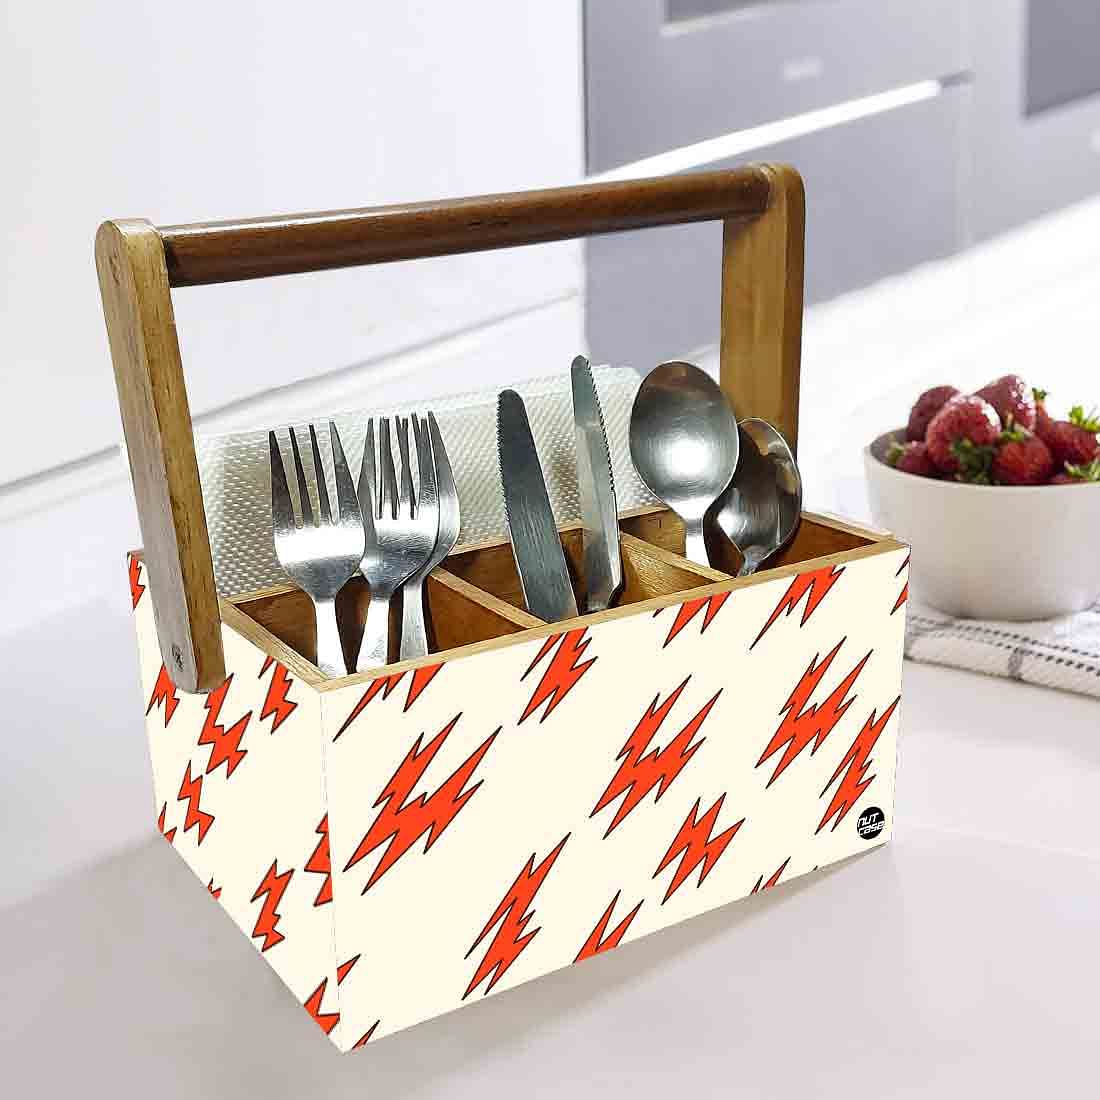 Spoon Stand for Dining Table Forks Knives Tissue Organizer - Red Flash Nutcase